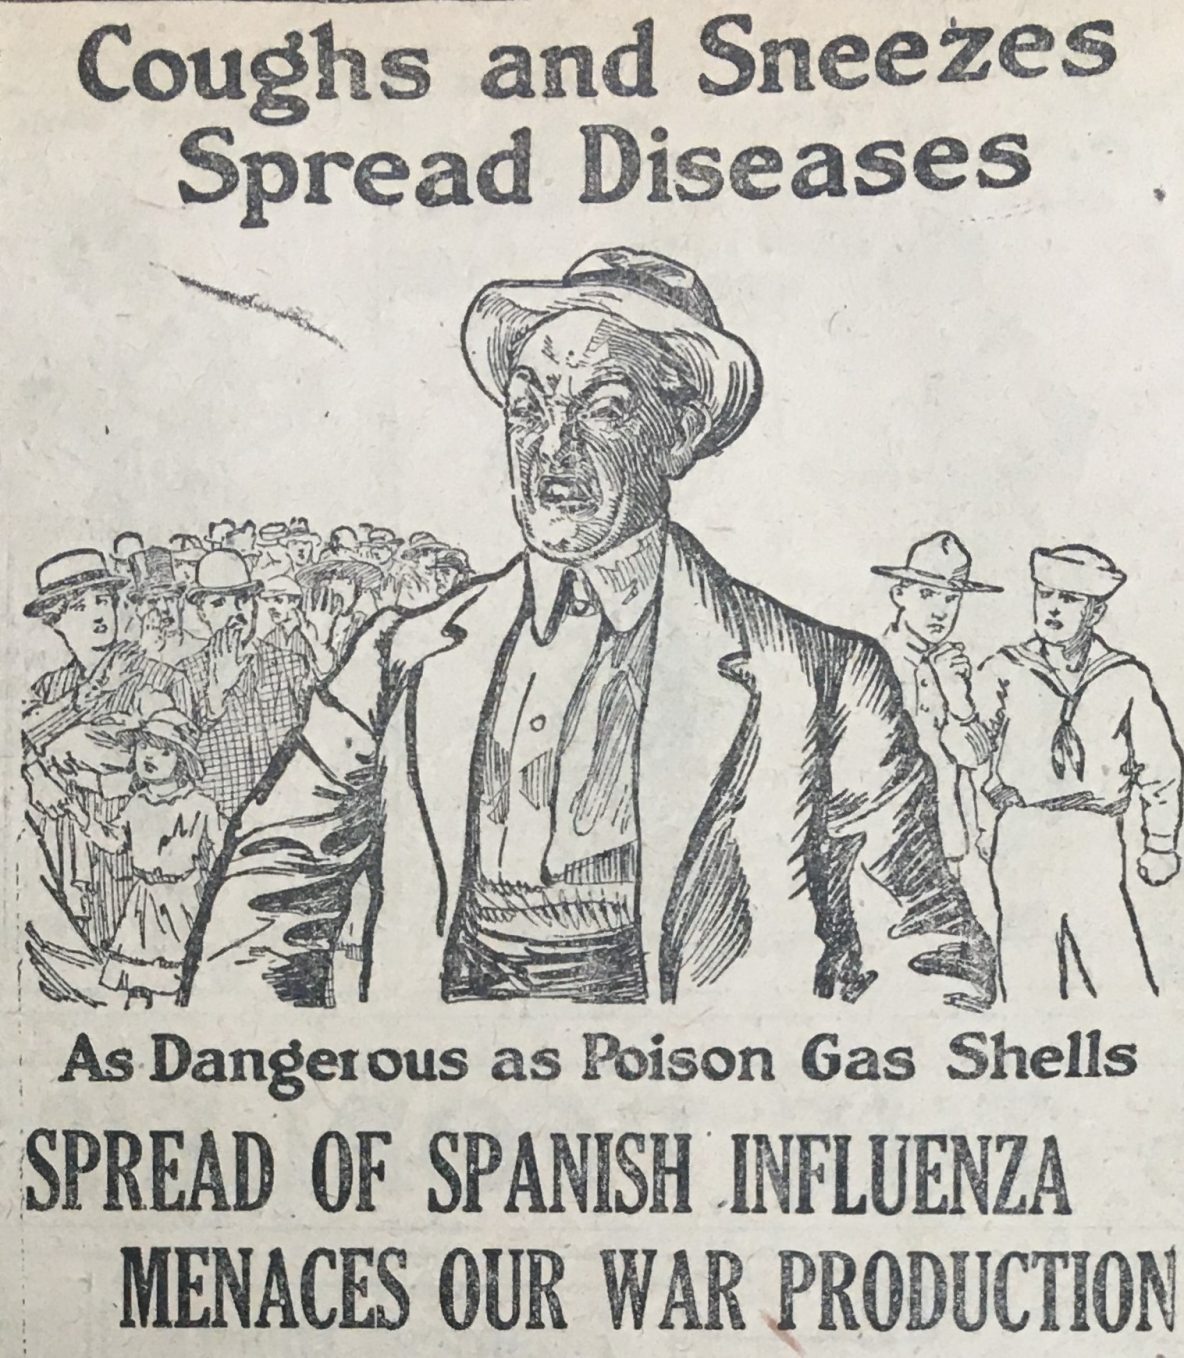 An image from a 1918 newspaper with a drawing of an apparent Spanish man coughing with people behind him looking upset. Text says "Coughs and Sneezes Spread Diseases / Spread of Spanish Influenza Menaces our War Production"